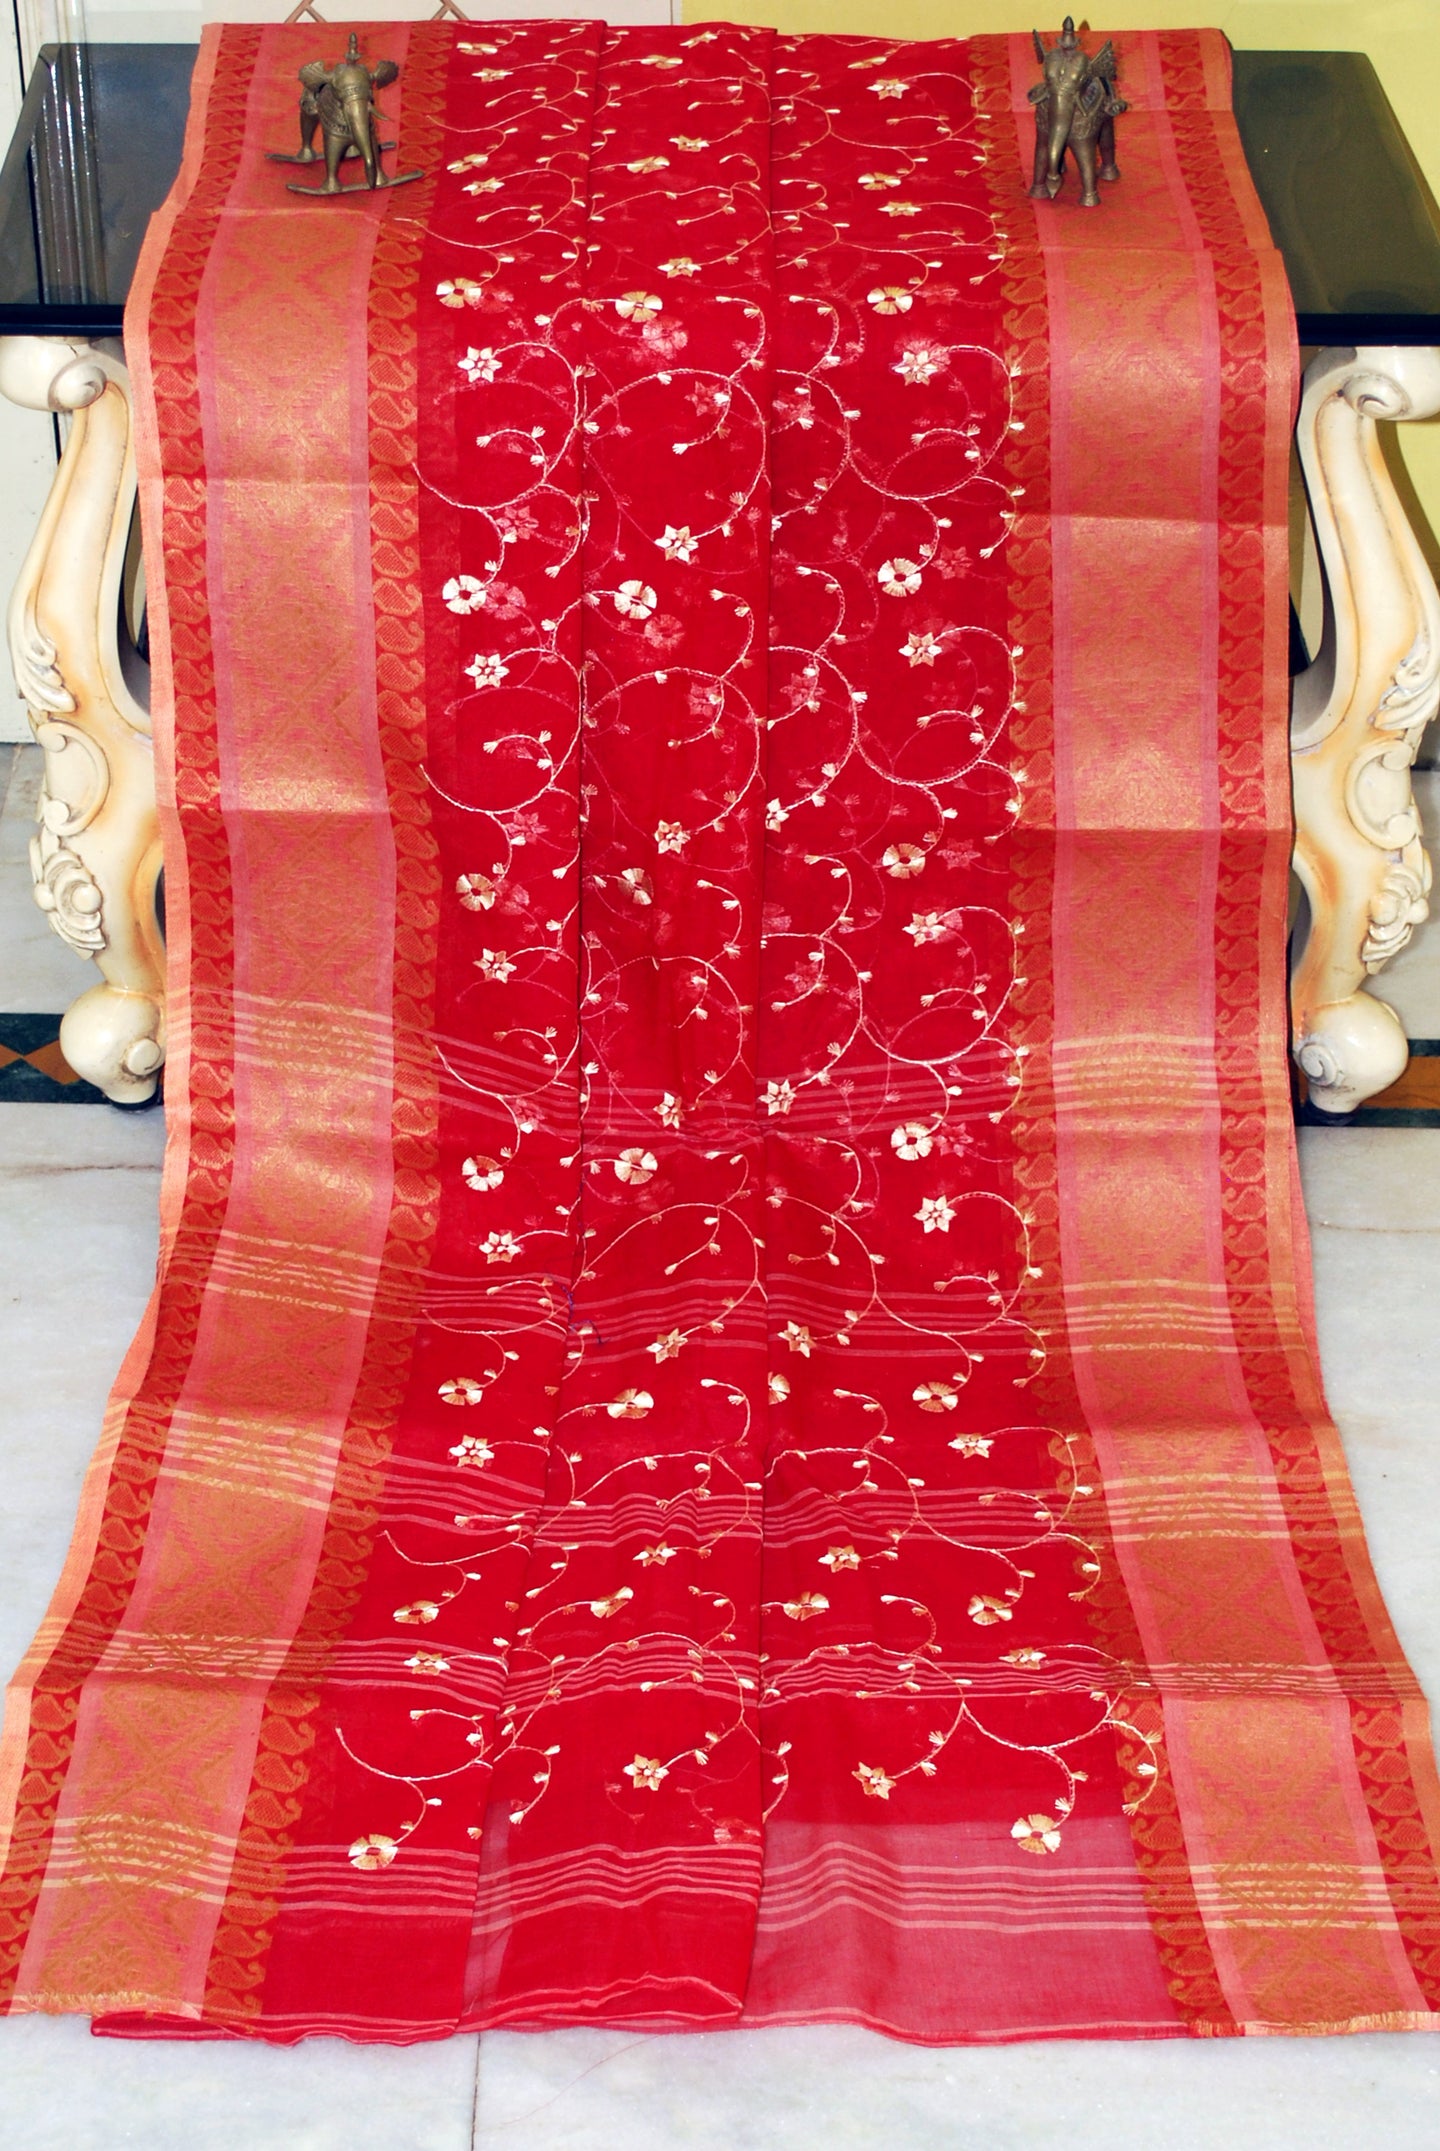 Bengal Handloom Cotton Saree with Floral Jaal Embroidery Work in Red, Chiffon White and Pale Golden